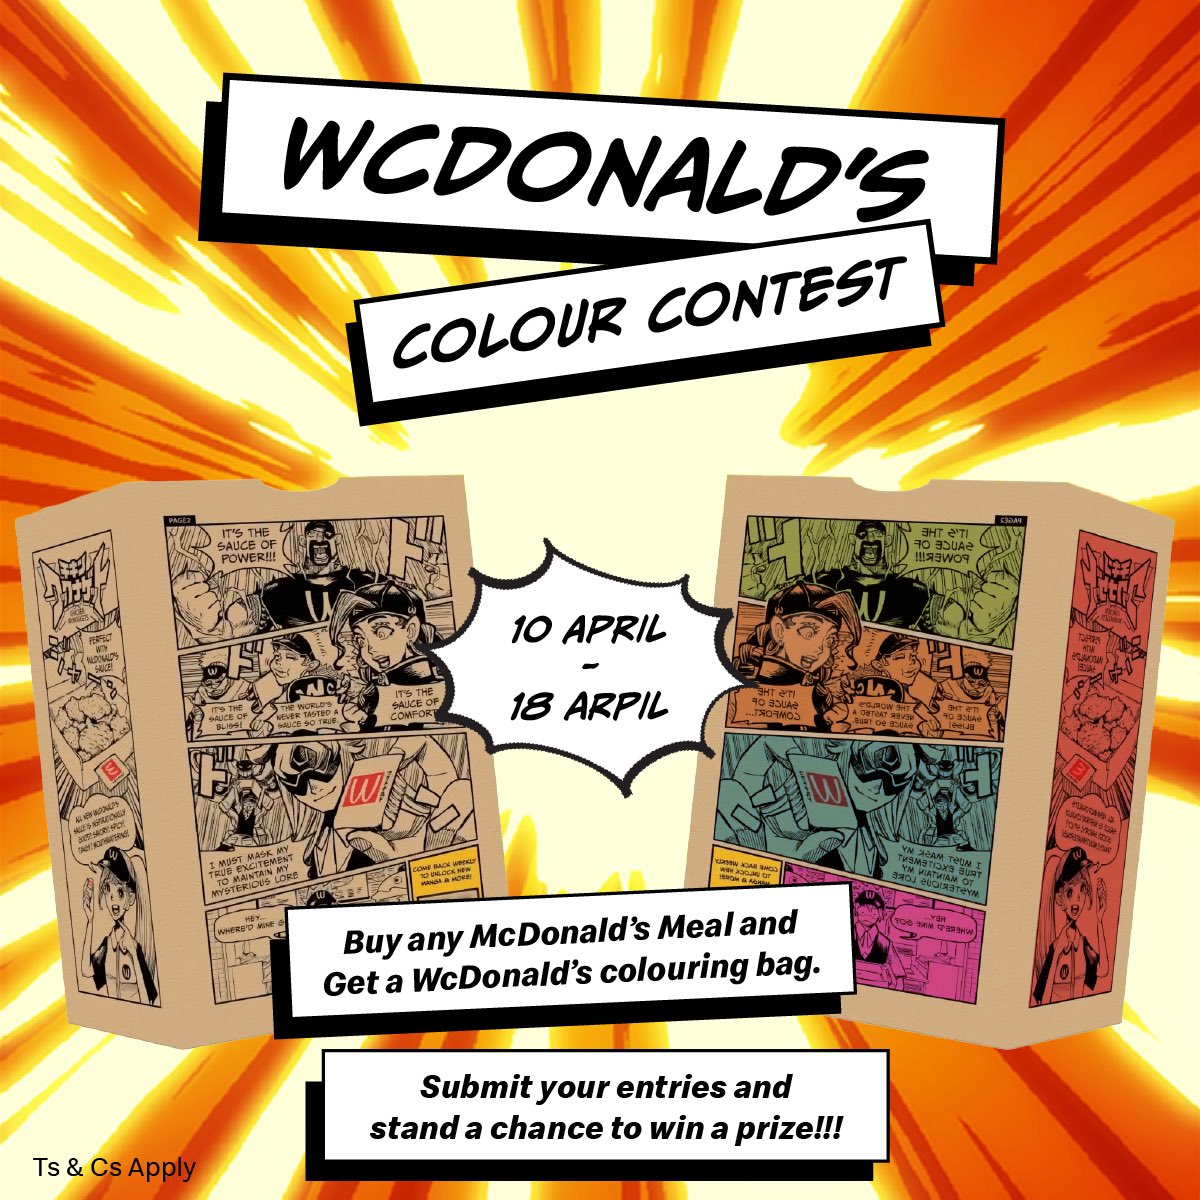 Ready to colour your way to an amazing prize? Join the #WcDonaldsColourContest now! Here’s how: Buy a McDonald’s meal, colour in your bag, share it via IG stories, tag us and stand a chance to win an awesome prize 🏆 ✨